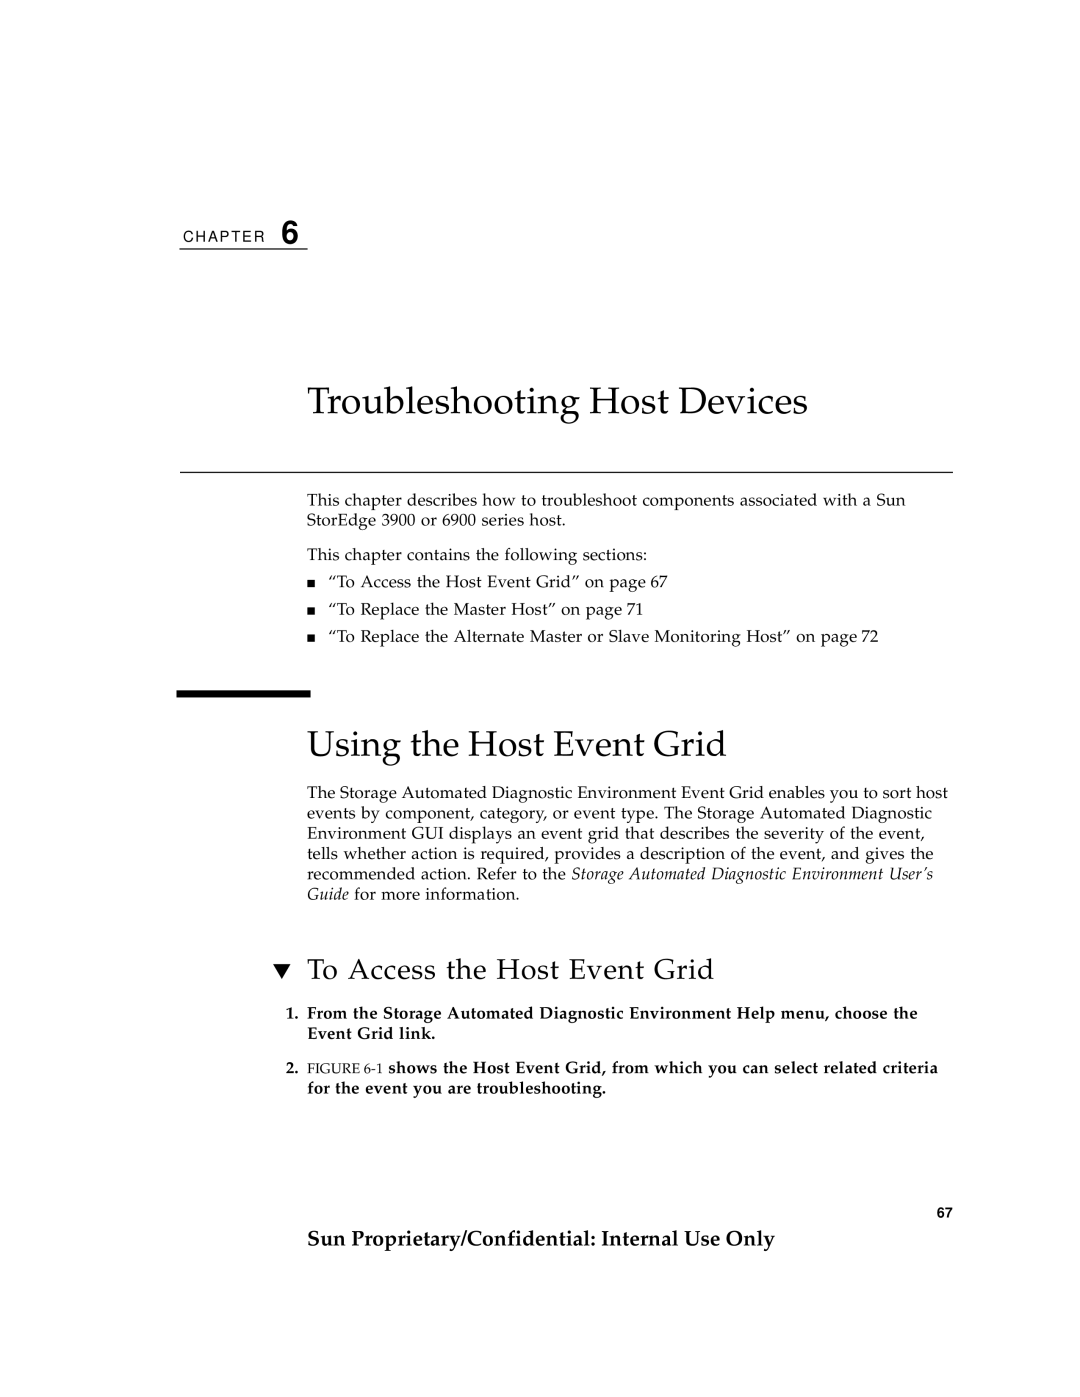 Sun Microsystems 6900, 3900 manual Troubleshooting Host Devices, Using the Host Event Grid, To Access the Host Event Grid 